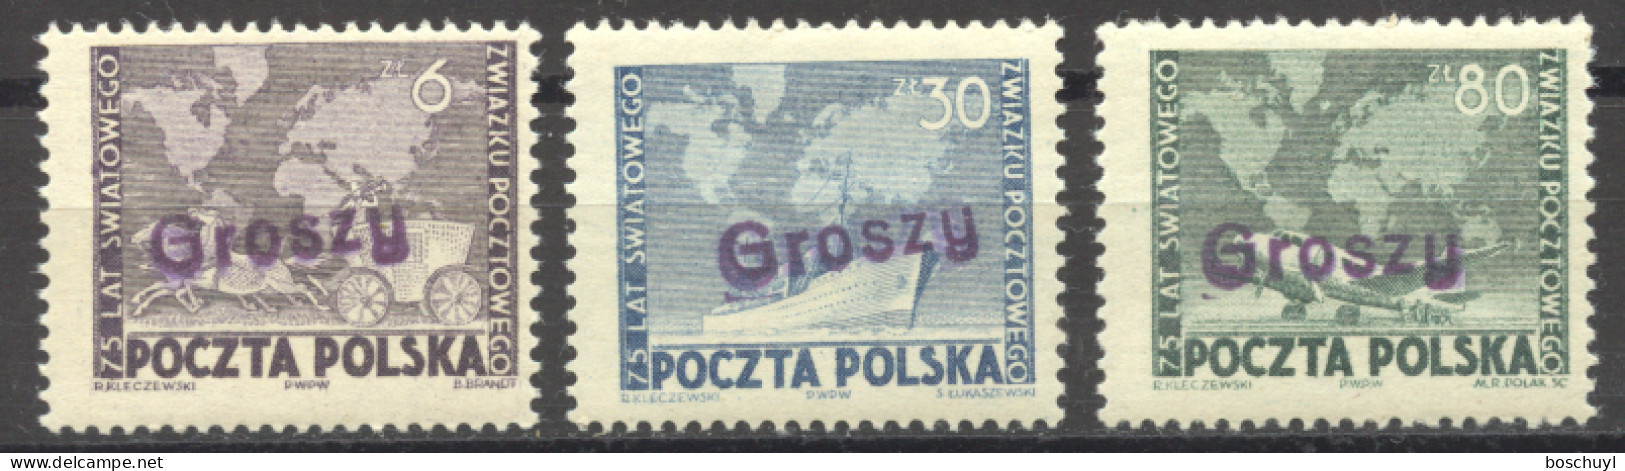 Poland, 1950, UPU, Universal Postal Union, United Nations, Groszy DOUBLE Overprint, MNH, Michel 636-638 - Unused Stamps